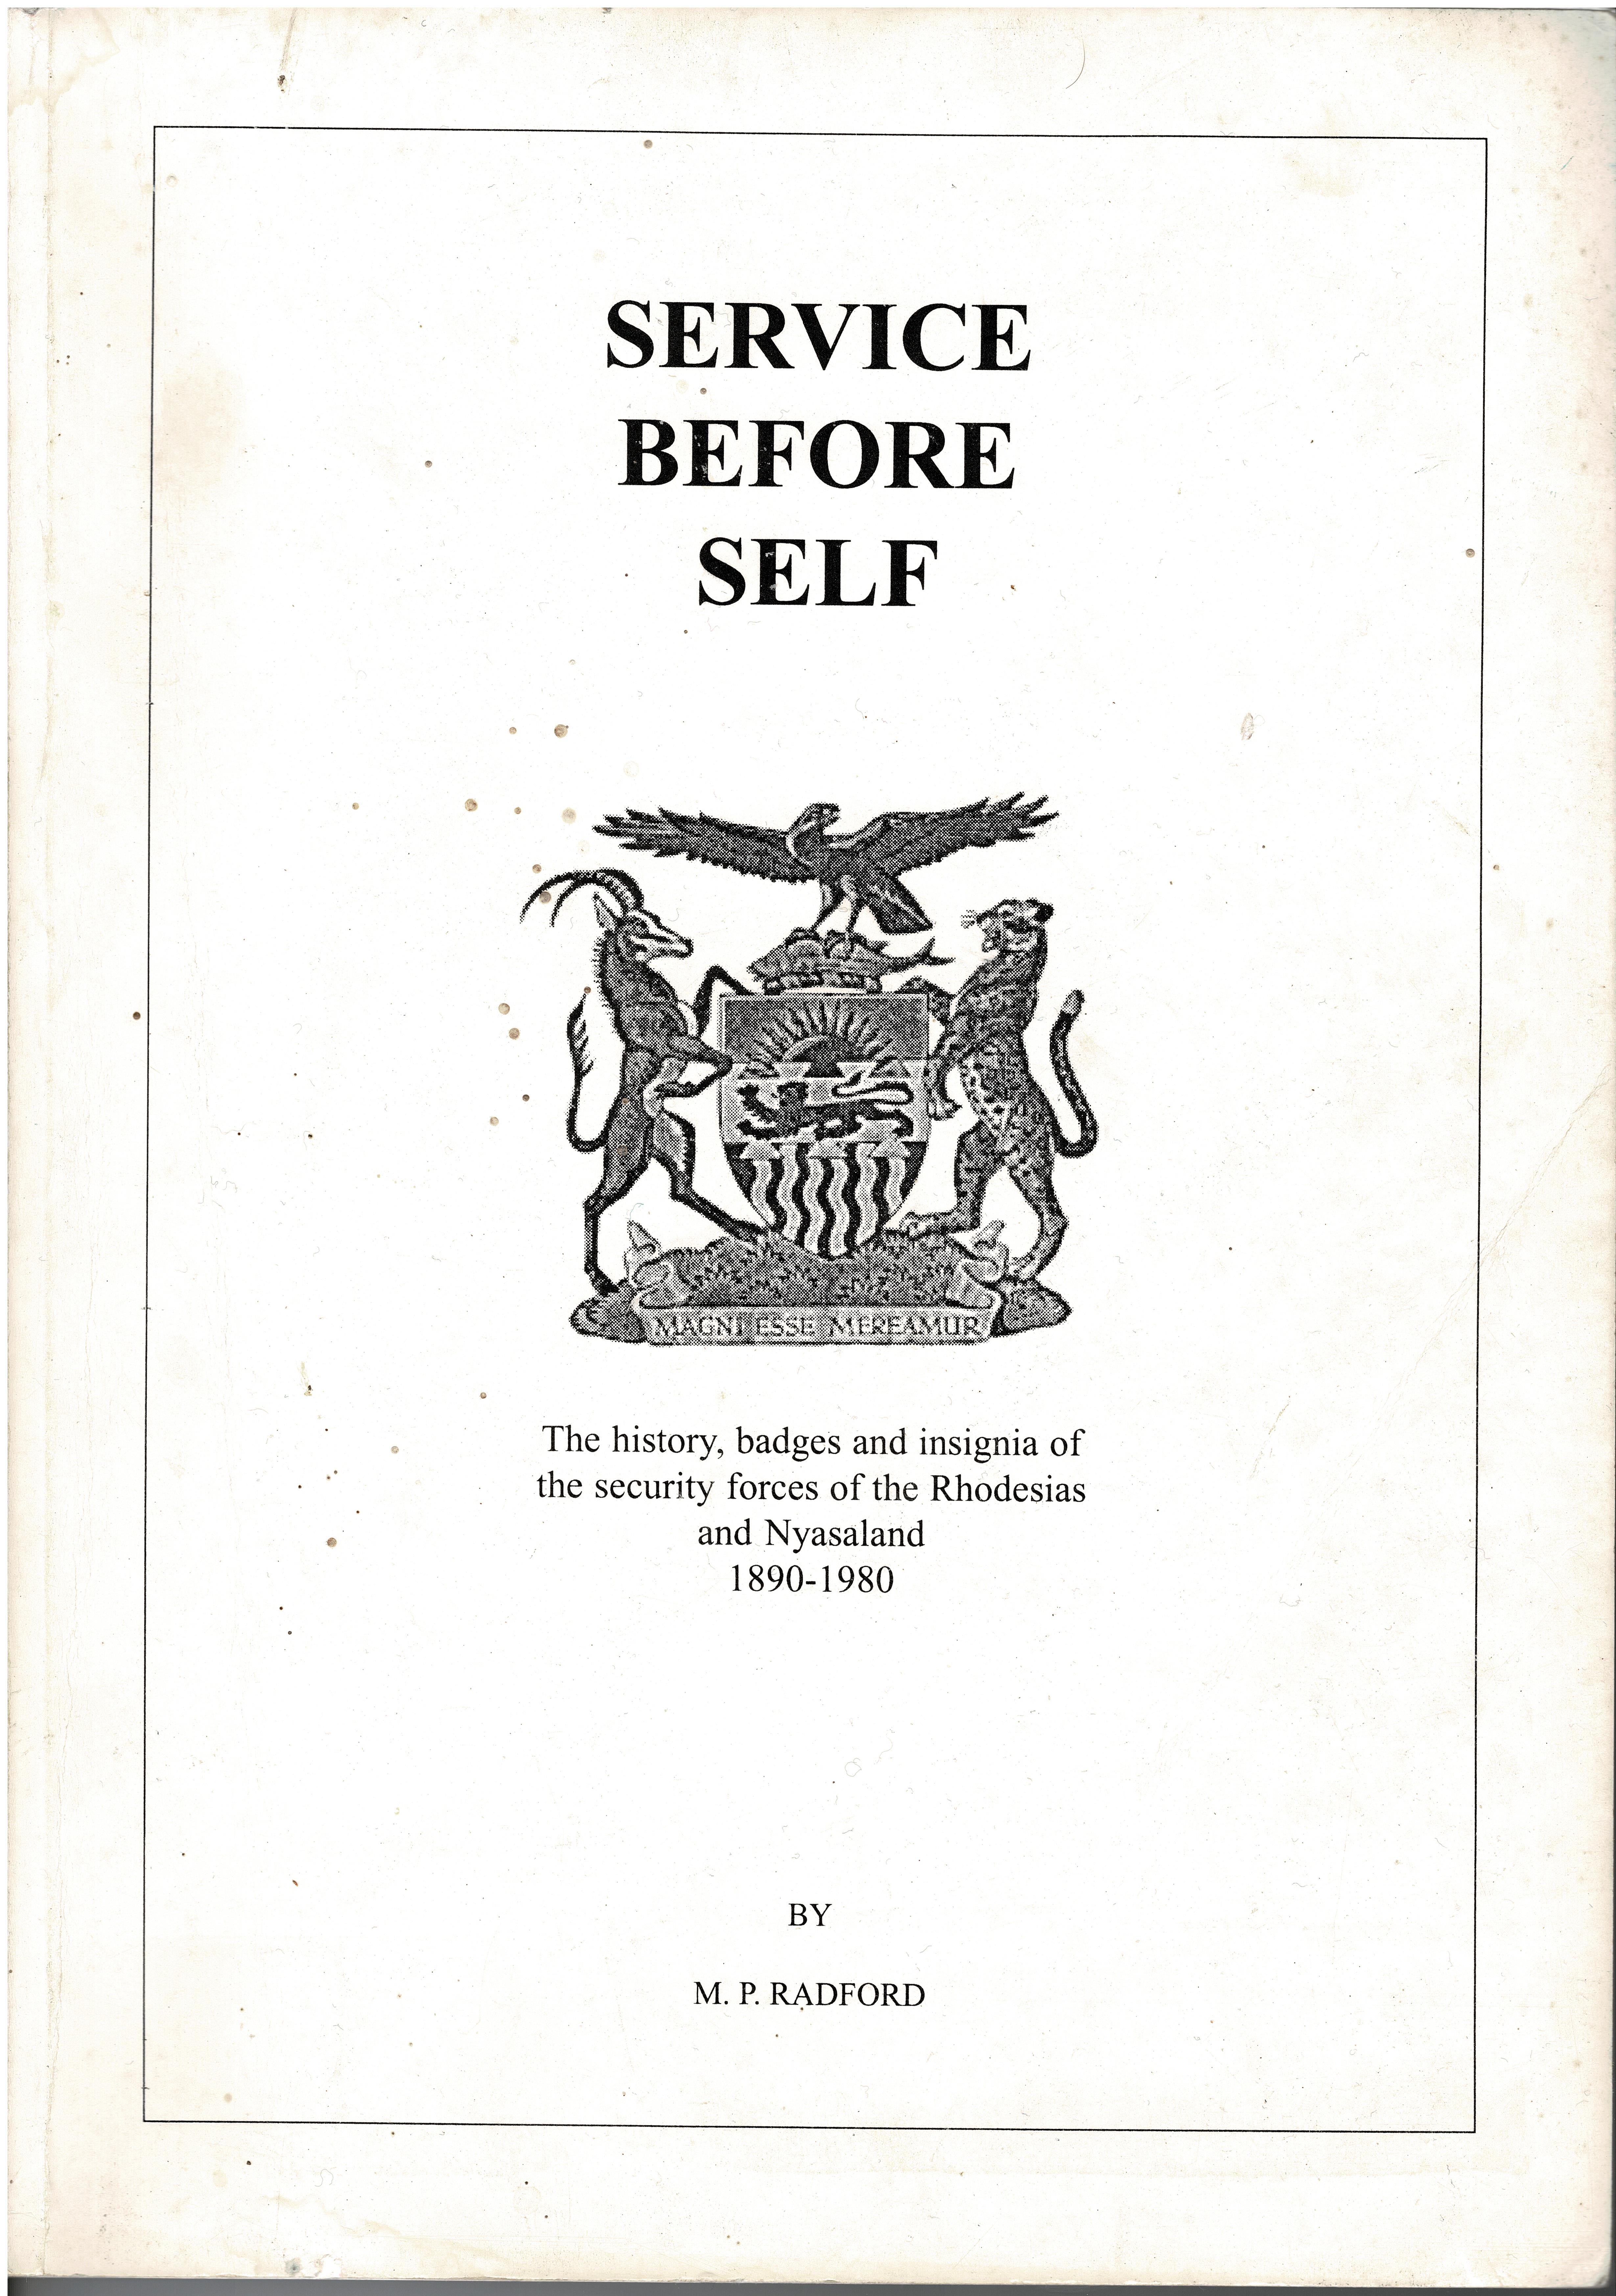 Service Before Self - A history of badges and insignia of the security forces of the Rhodesias and Nyasaland  1890-1980